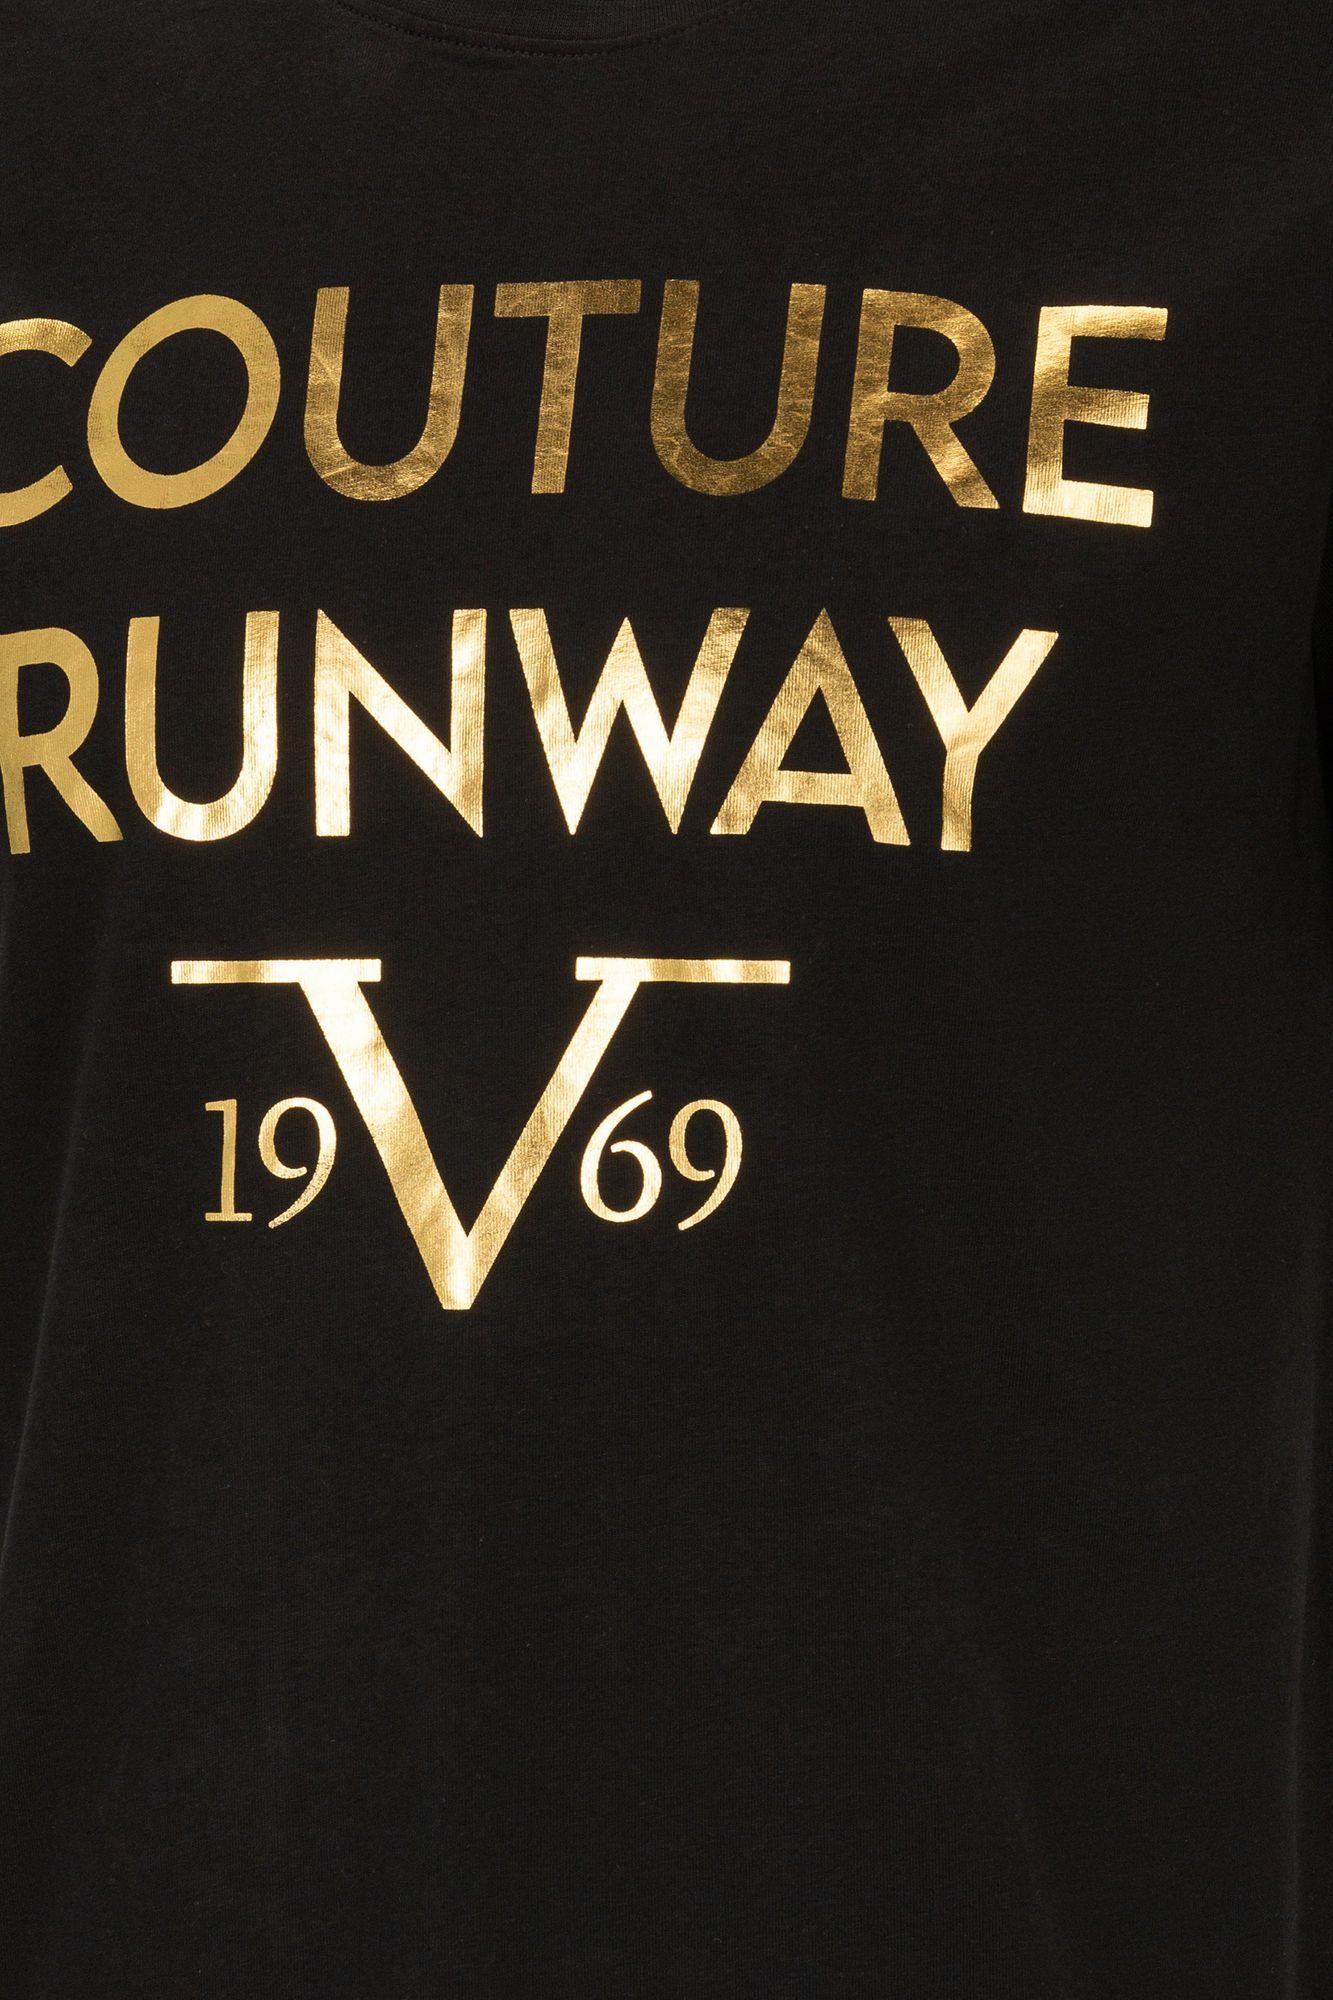 Italia Jacoby by Versace 19V69 T-Shirt